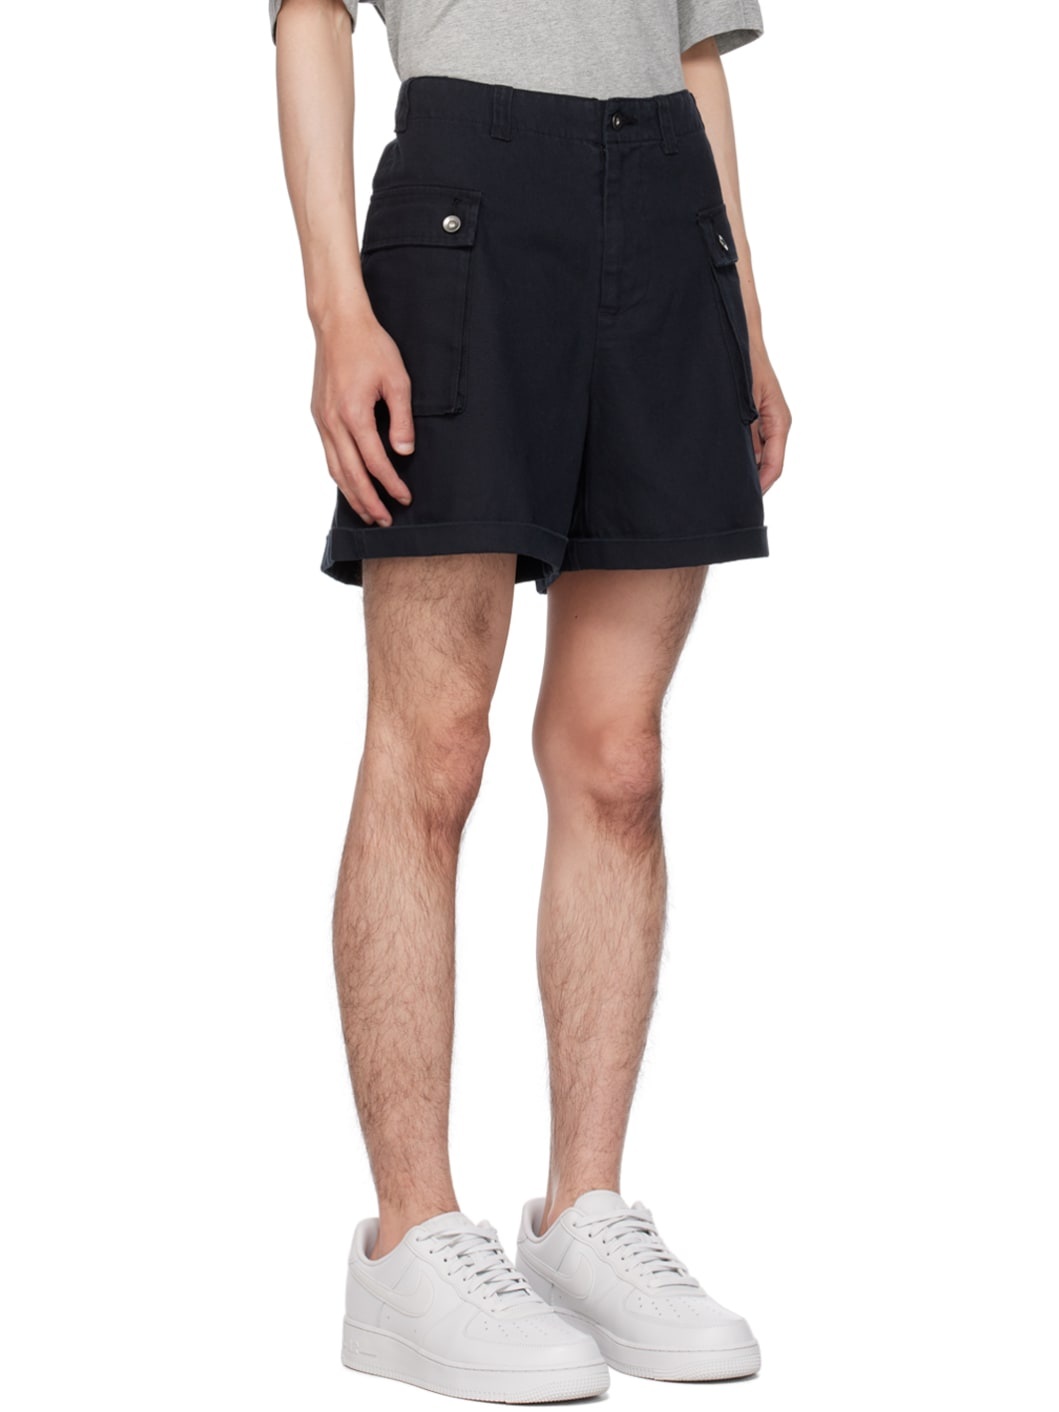 Black Embroidered Cargo Shorts - 2